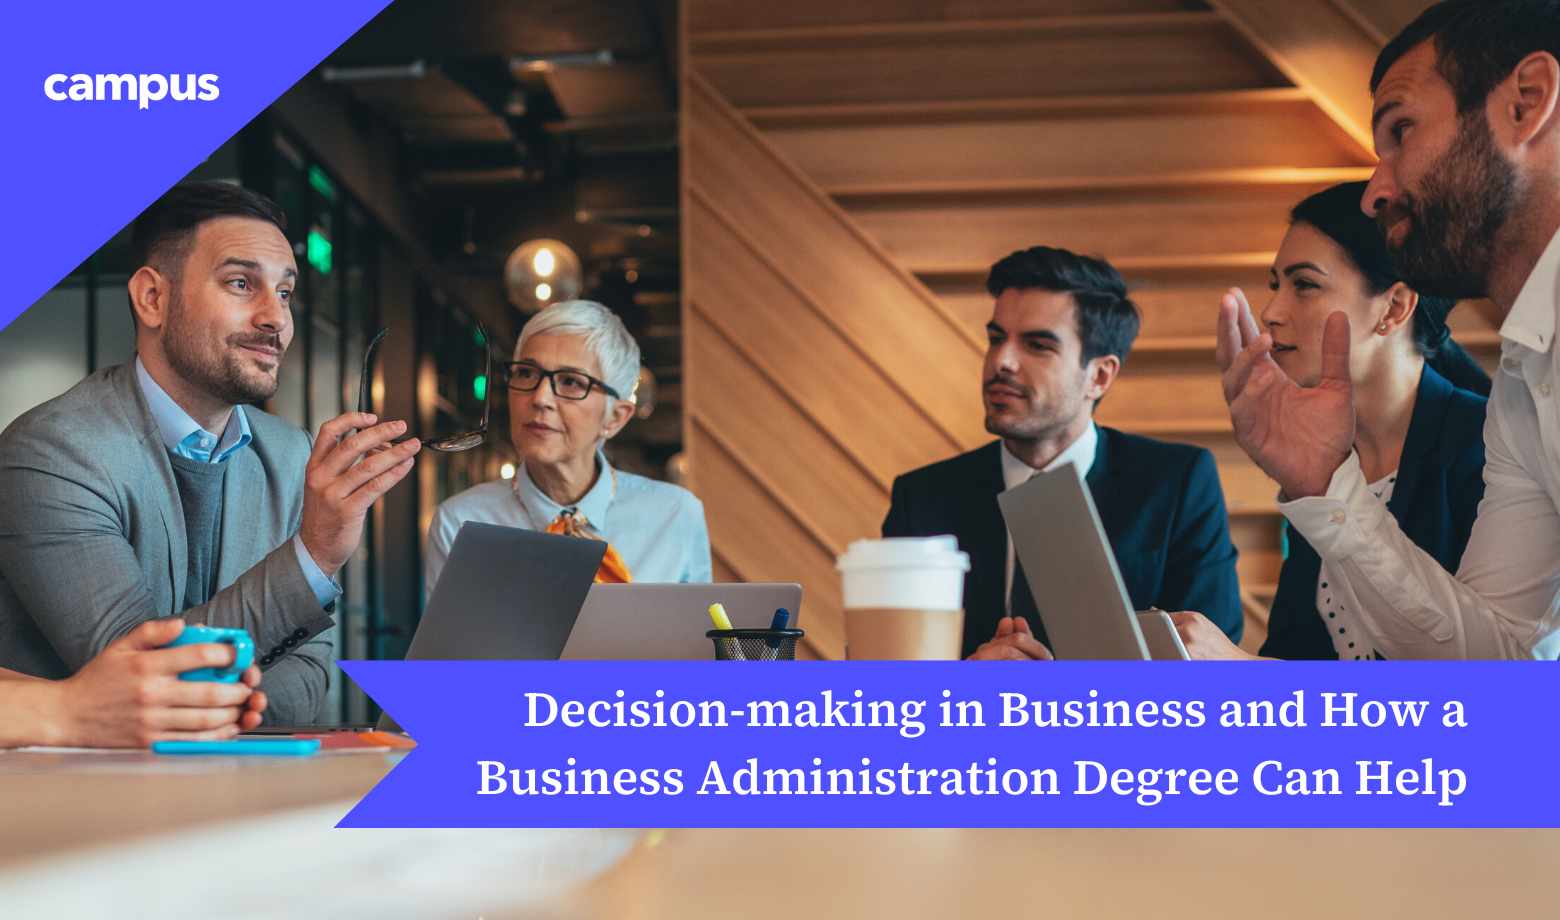 Decision-making in Business and How a Business Administration Degree Can Help